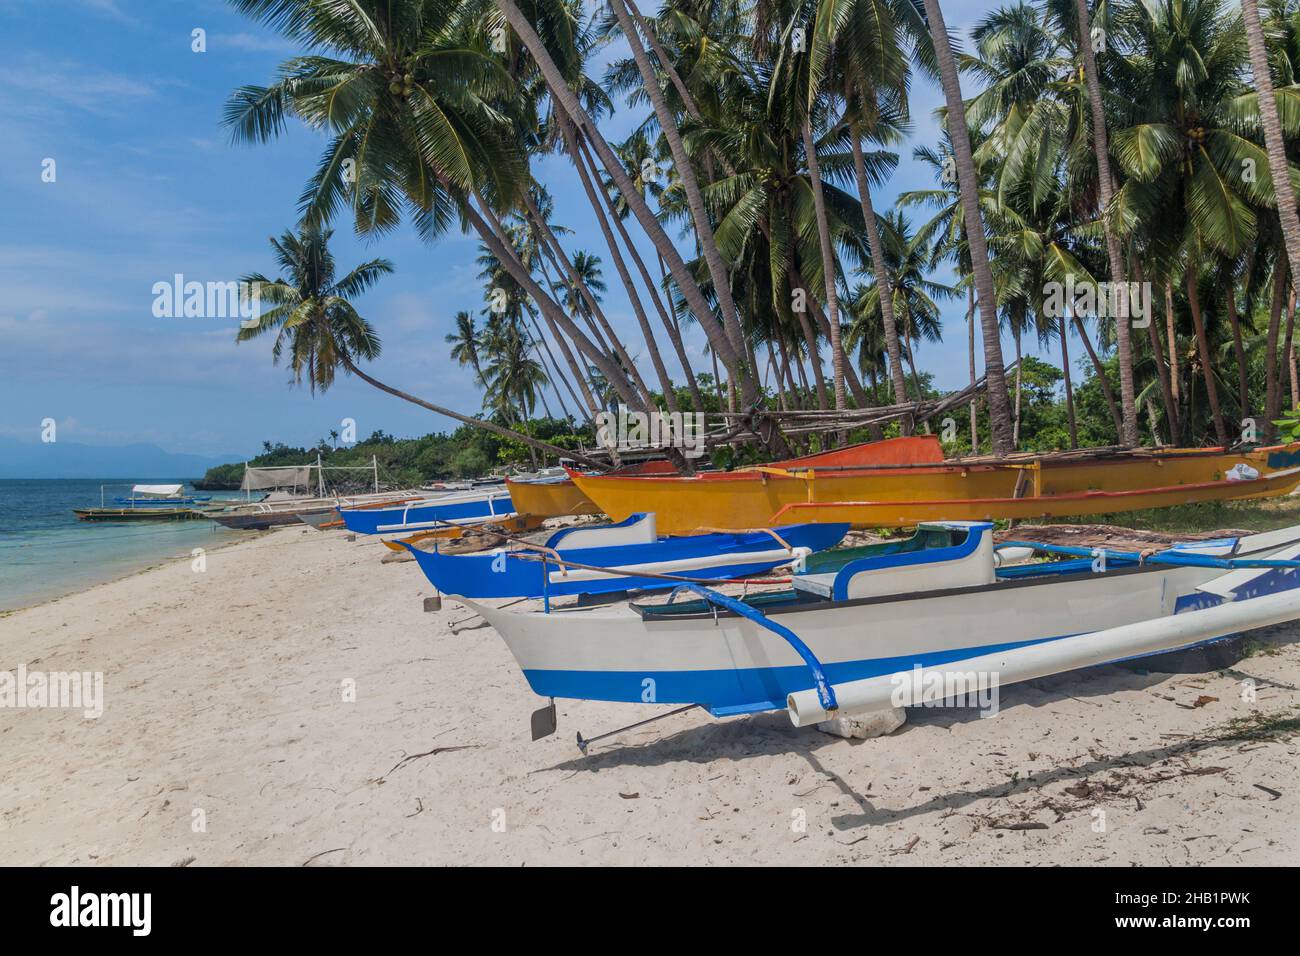 Palm and boats at the Paliton Beach on Siquijor island, Philippines. Stock Photo